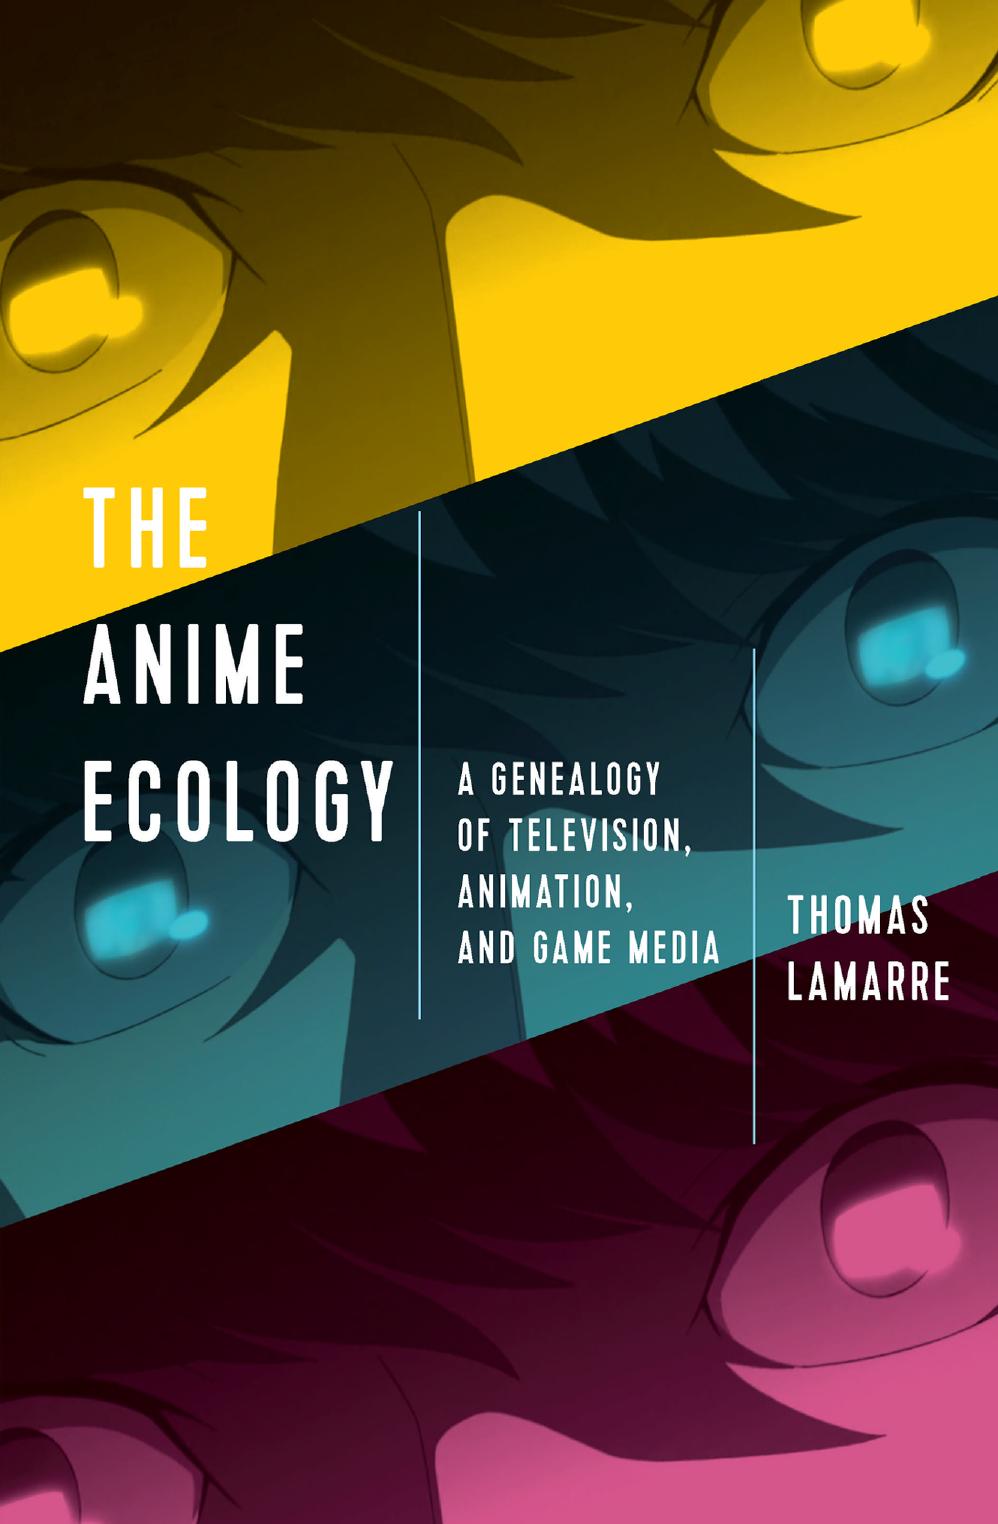 The Anime Ecology: A Genealogy of Television, Animation, and Game Media by Thomas Lamarre